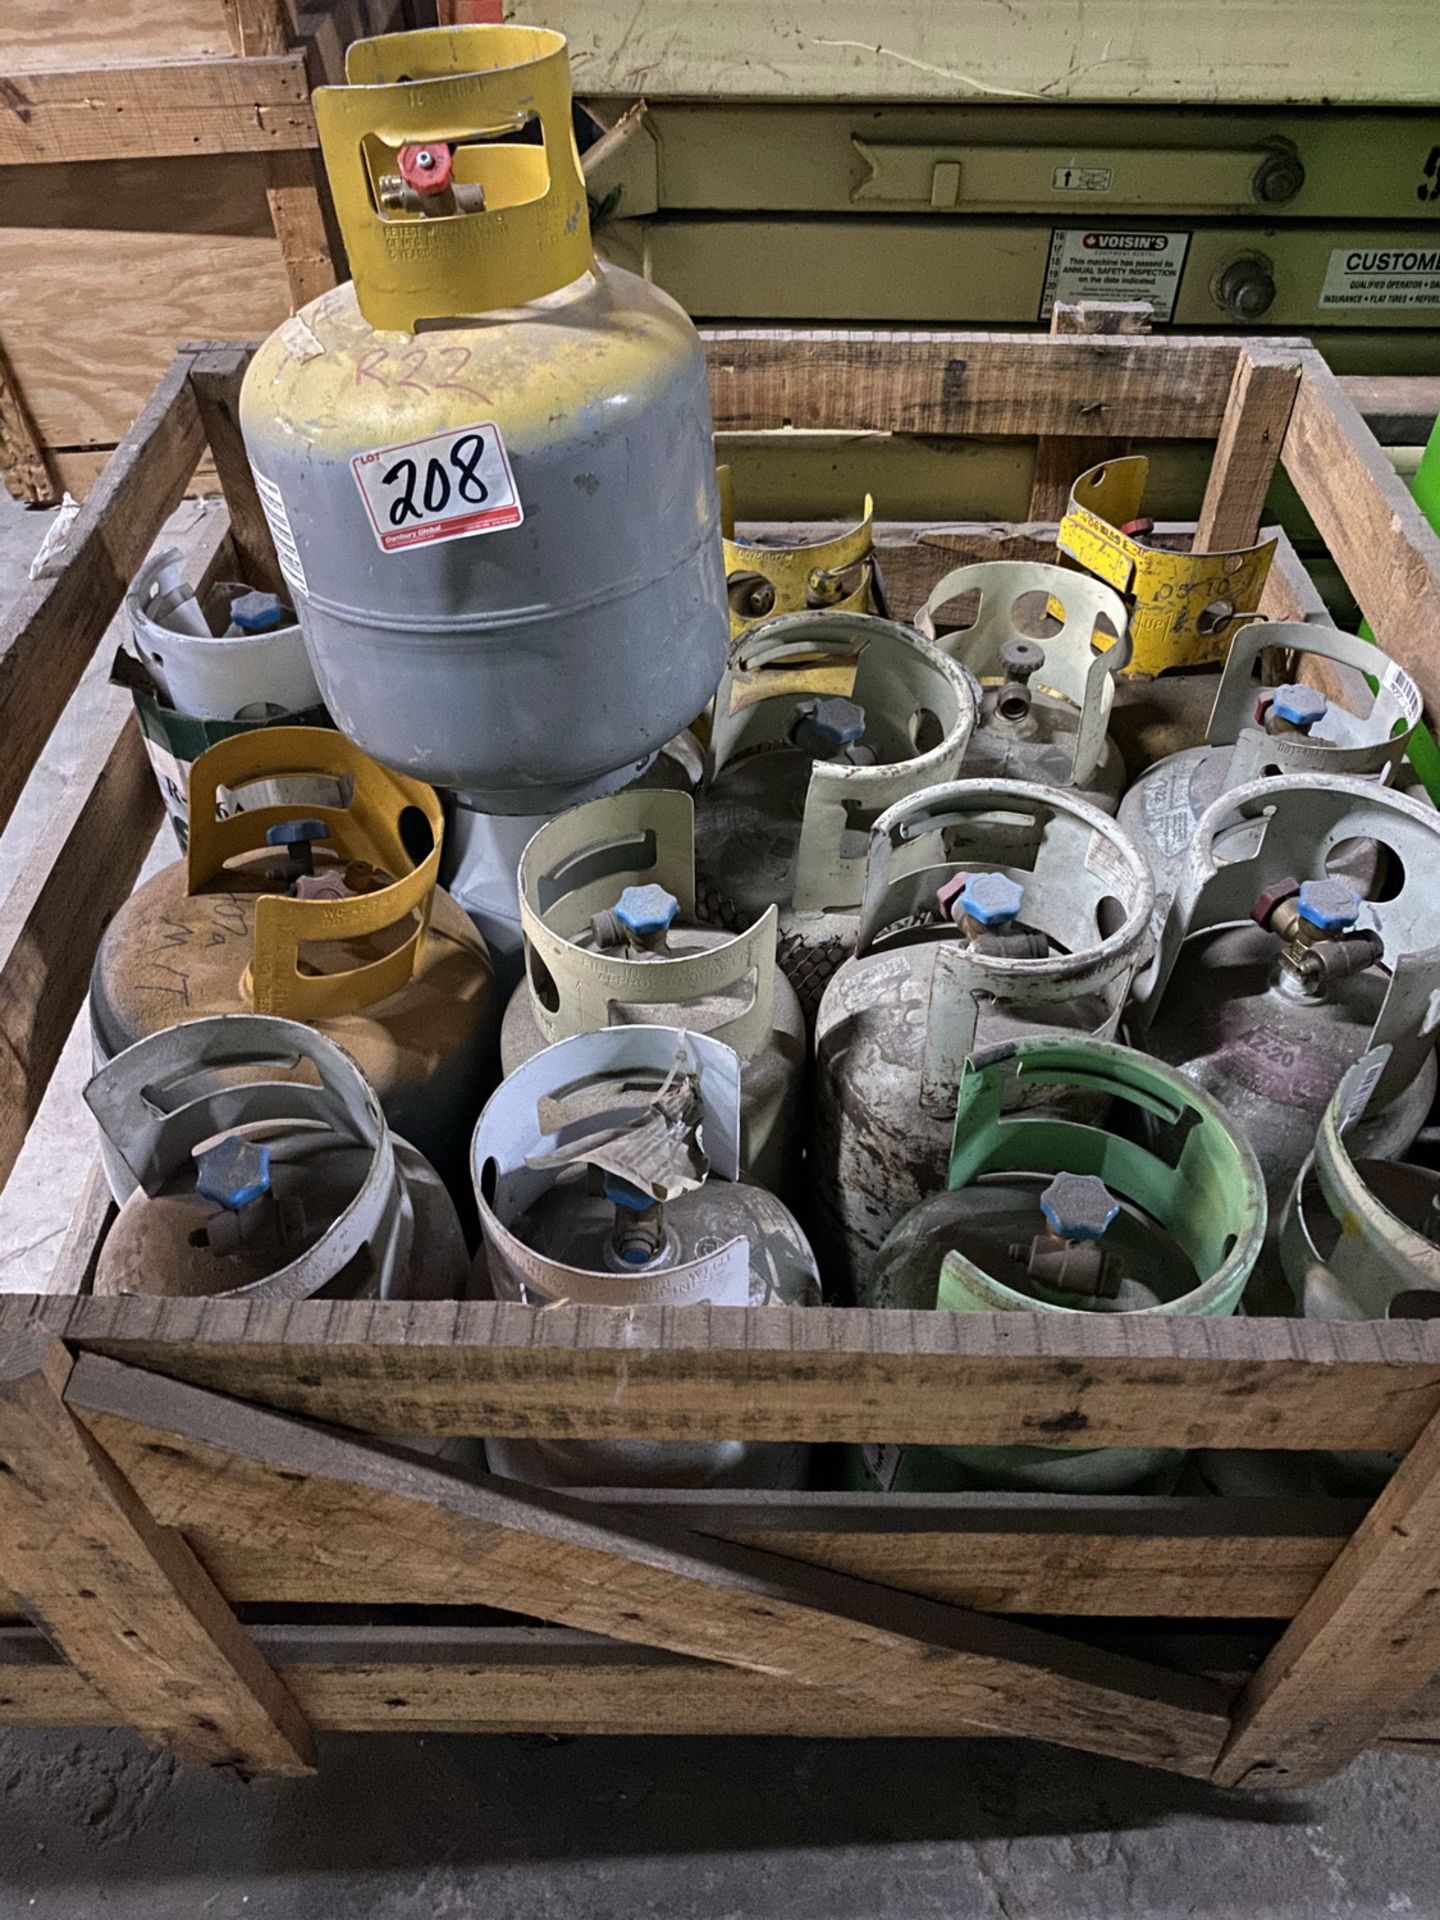 LOT - ASSORTED EMPTY PROPANE AND GAS TANKS AND CYLINDERS (2 SKIDS) - Image 3 of 3